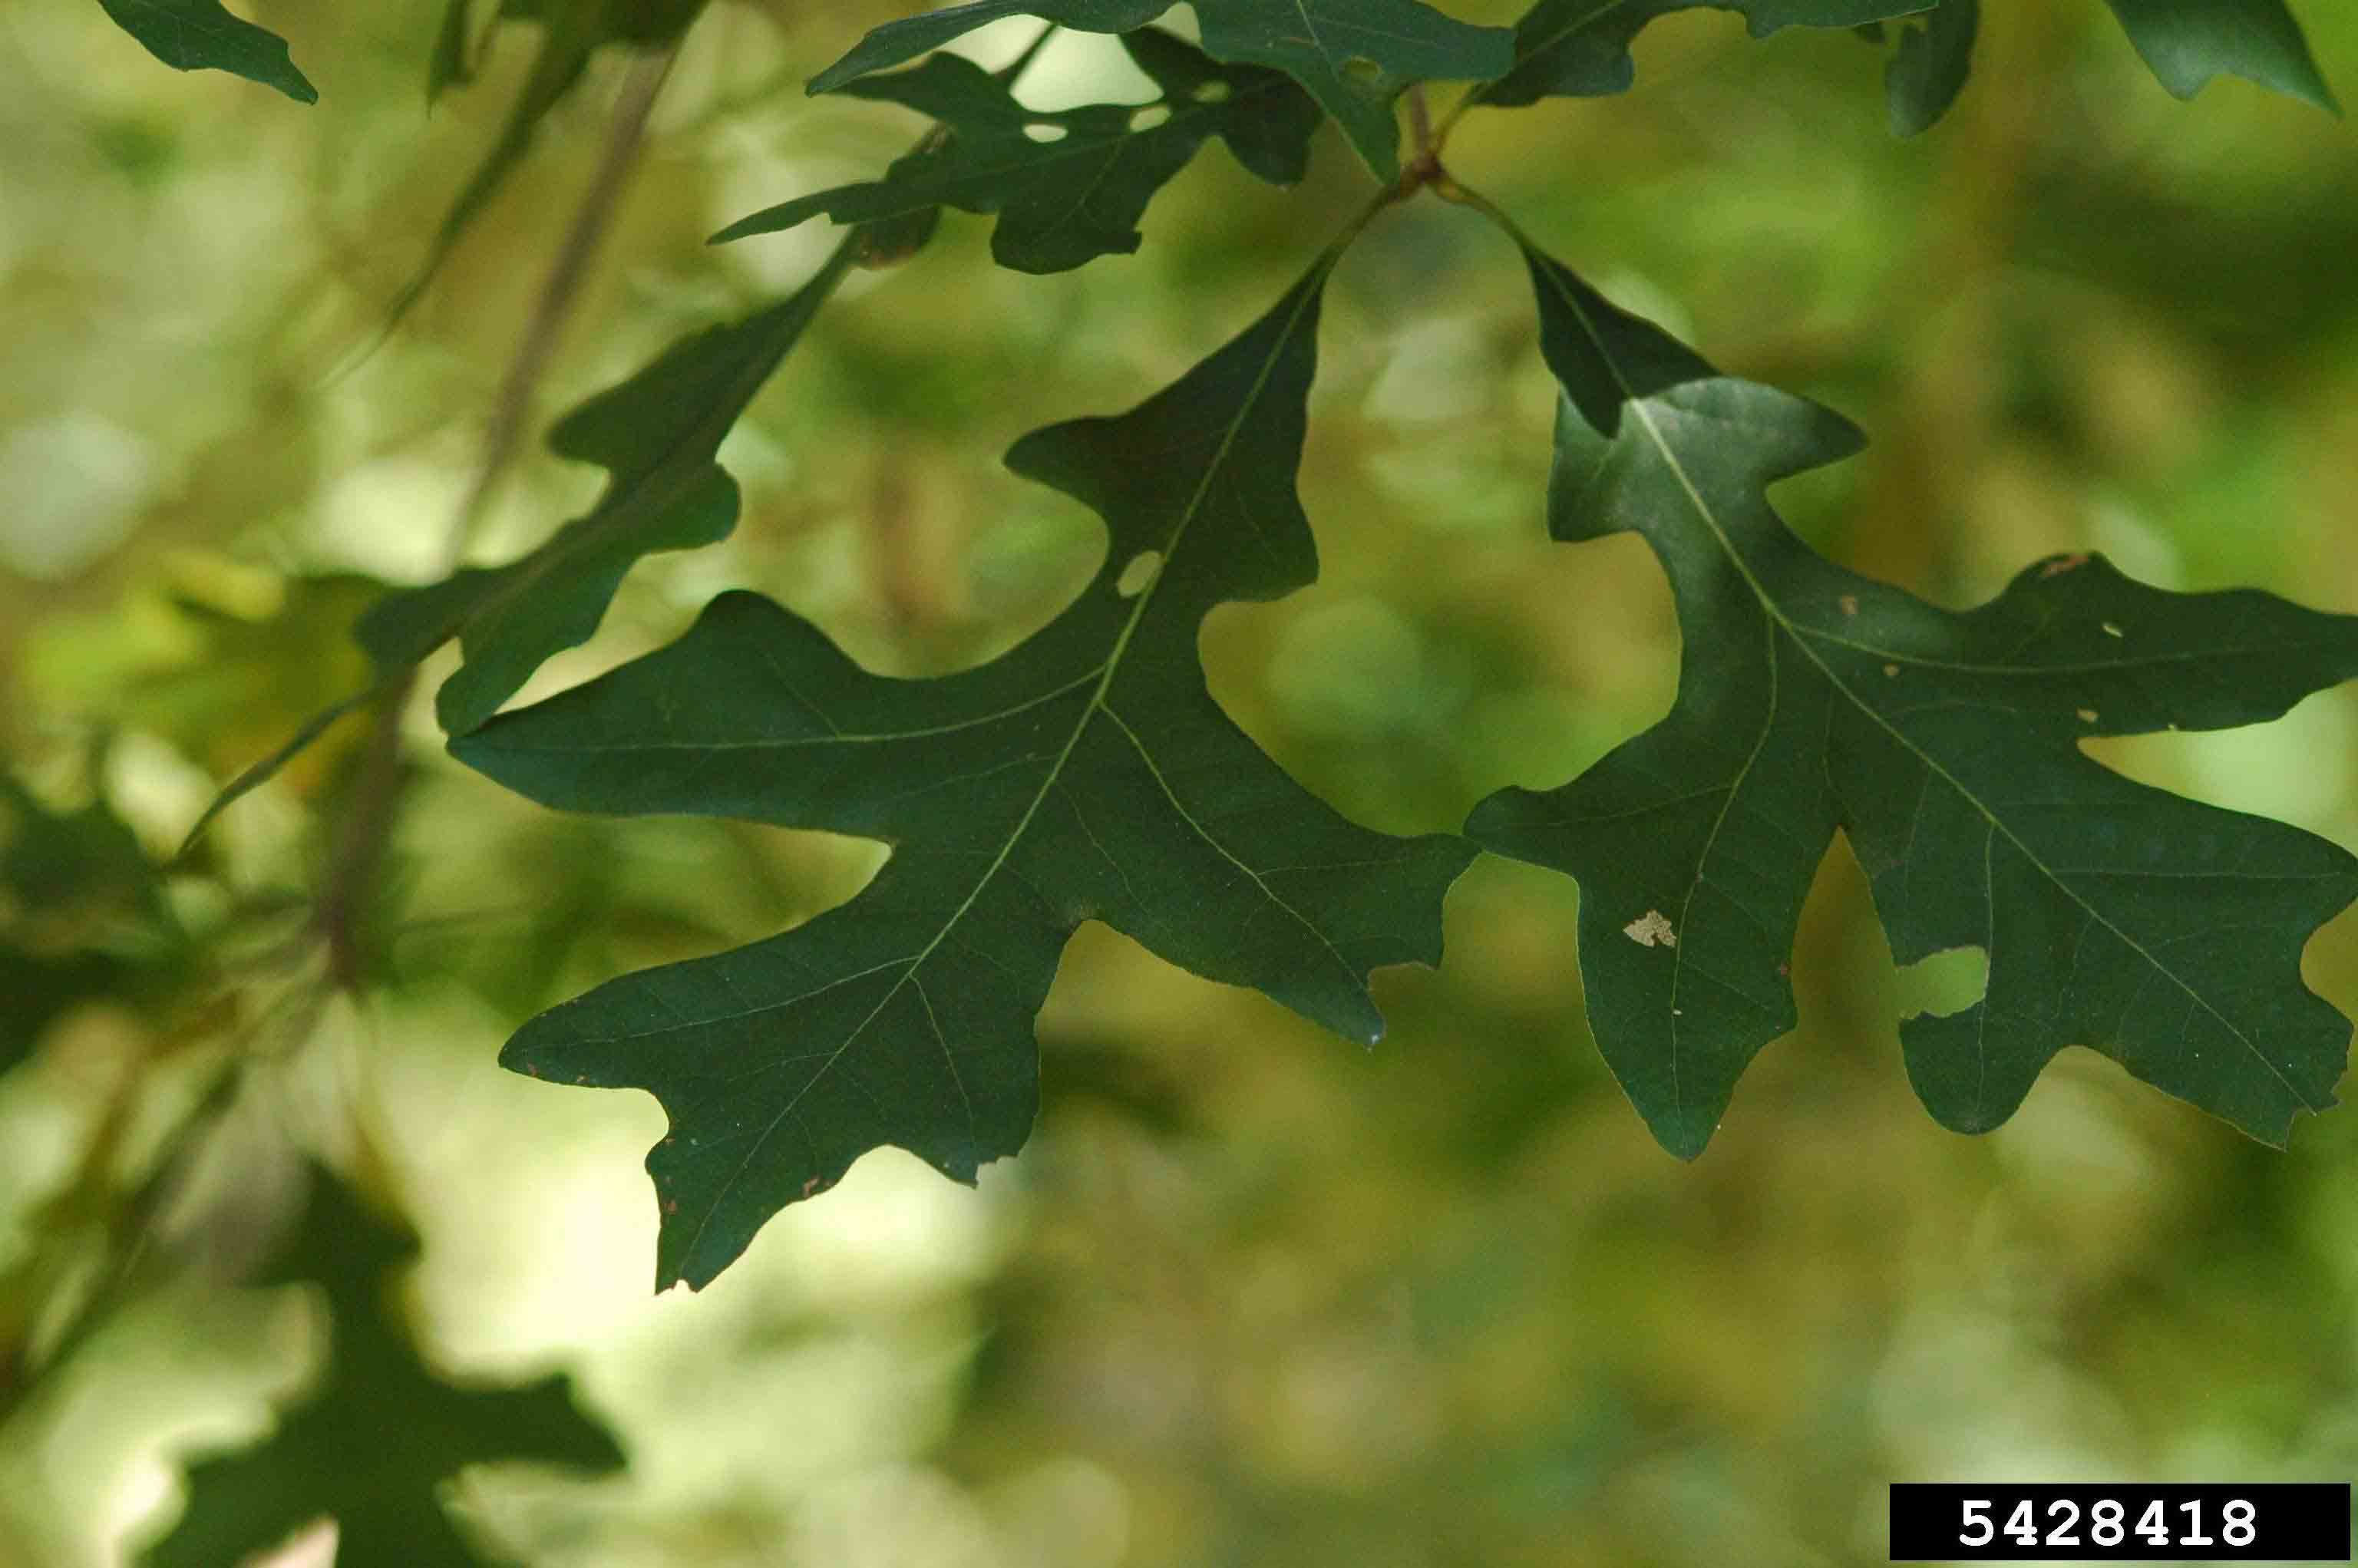 Overcup oak leaves, showing deep lobes and no bristles on the tips